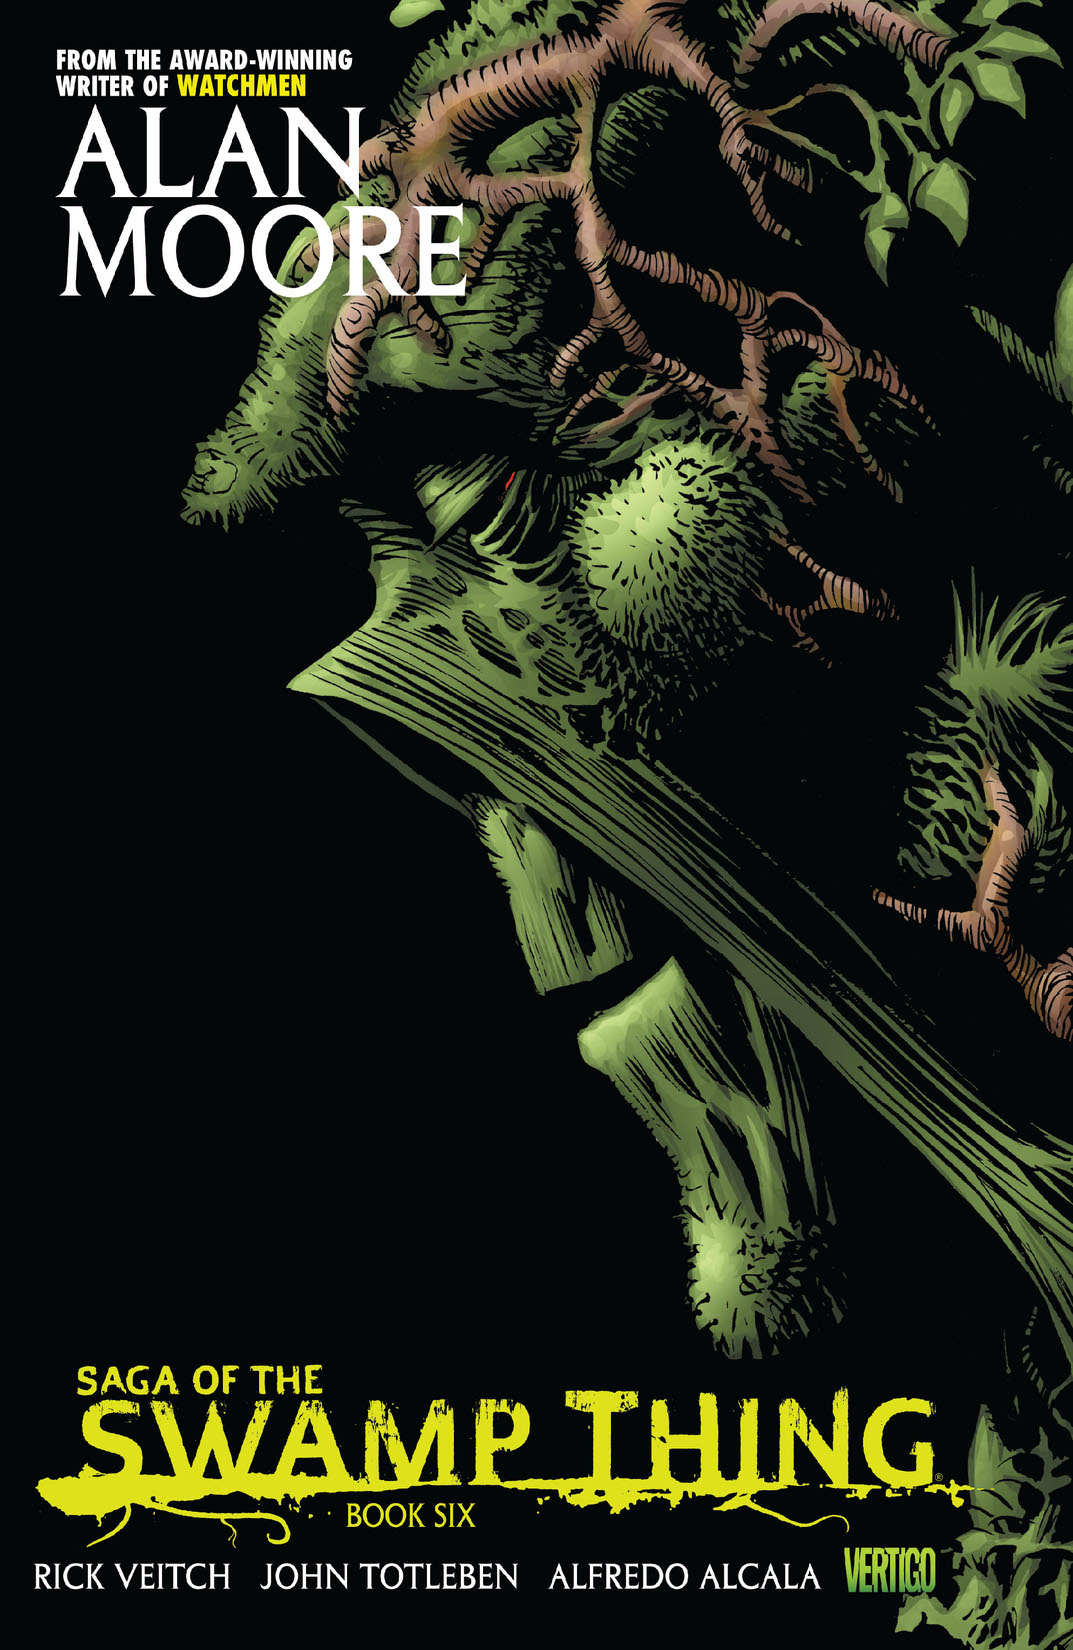 Saga of the Swamp Thing Book 6 preview images